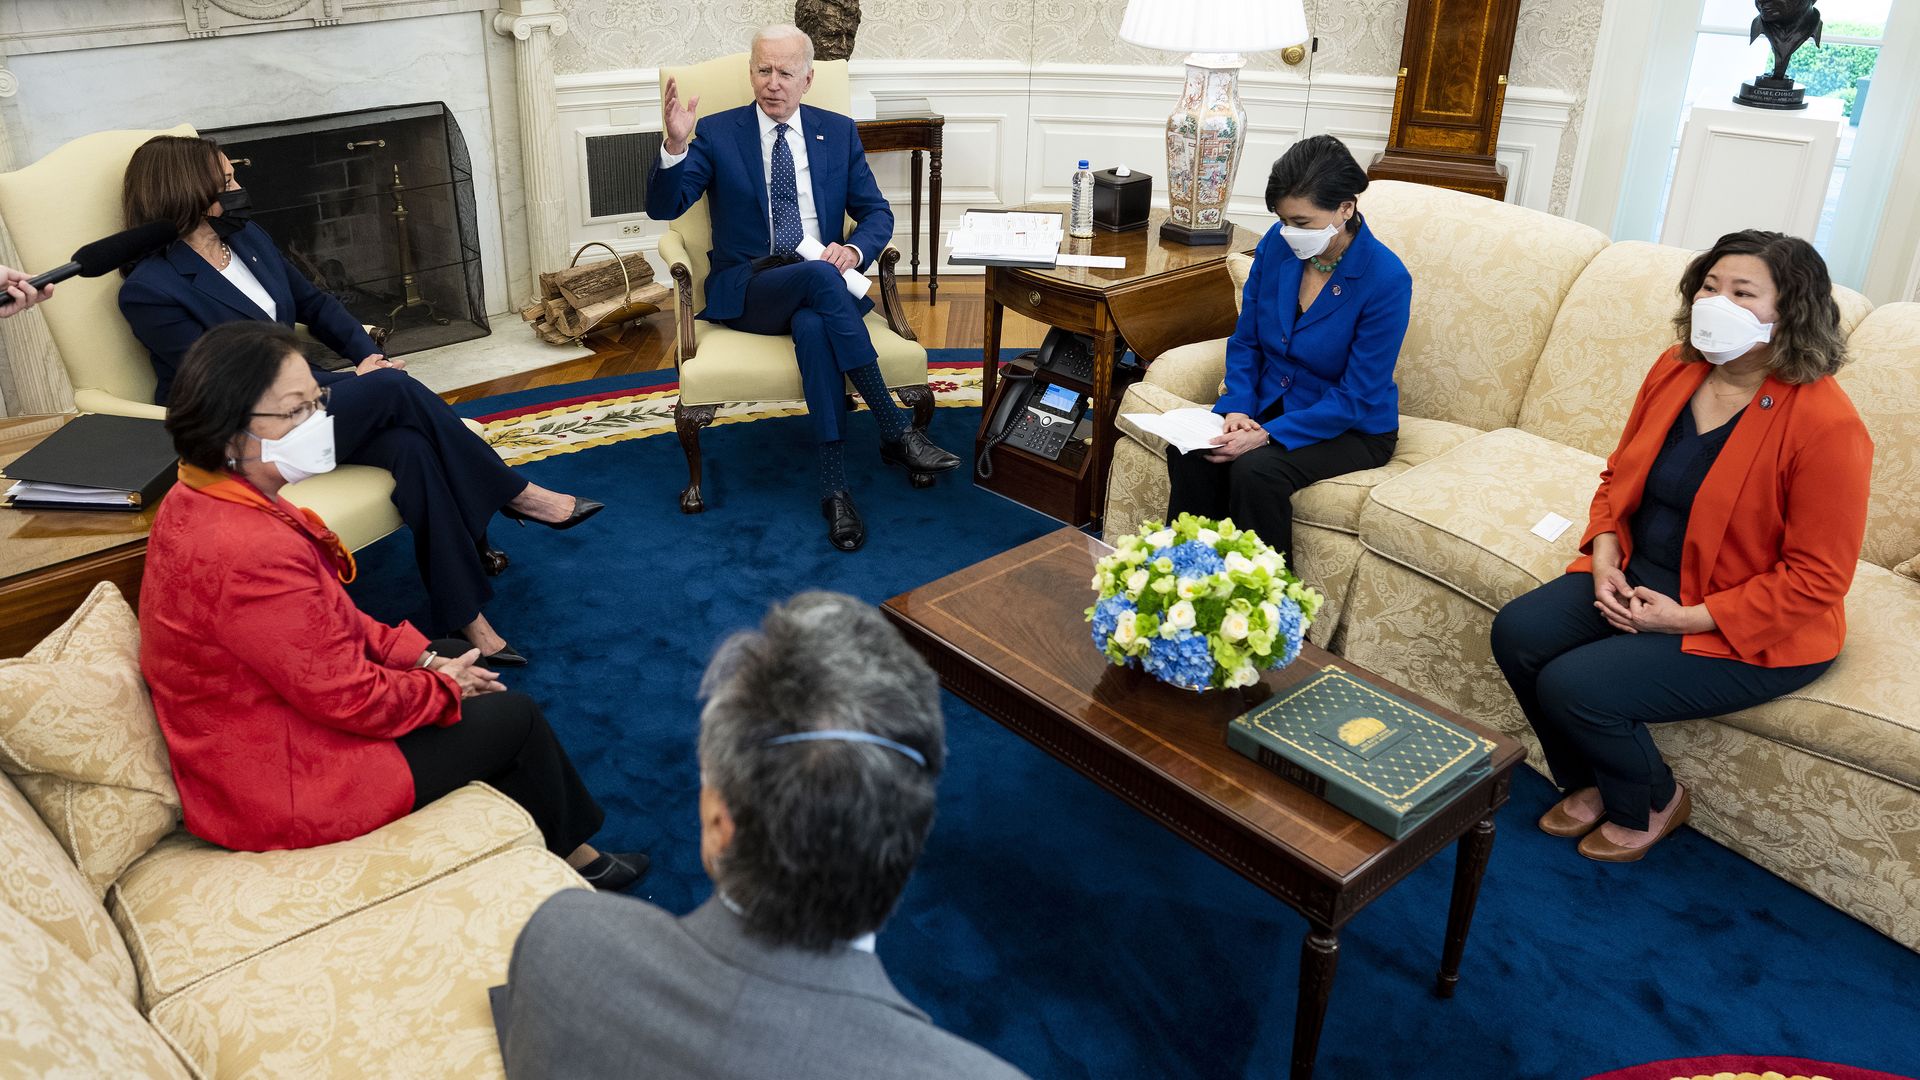 Picture of President Biden and Vice President Harris sitting in the oval office alongside Asian lawmakers